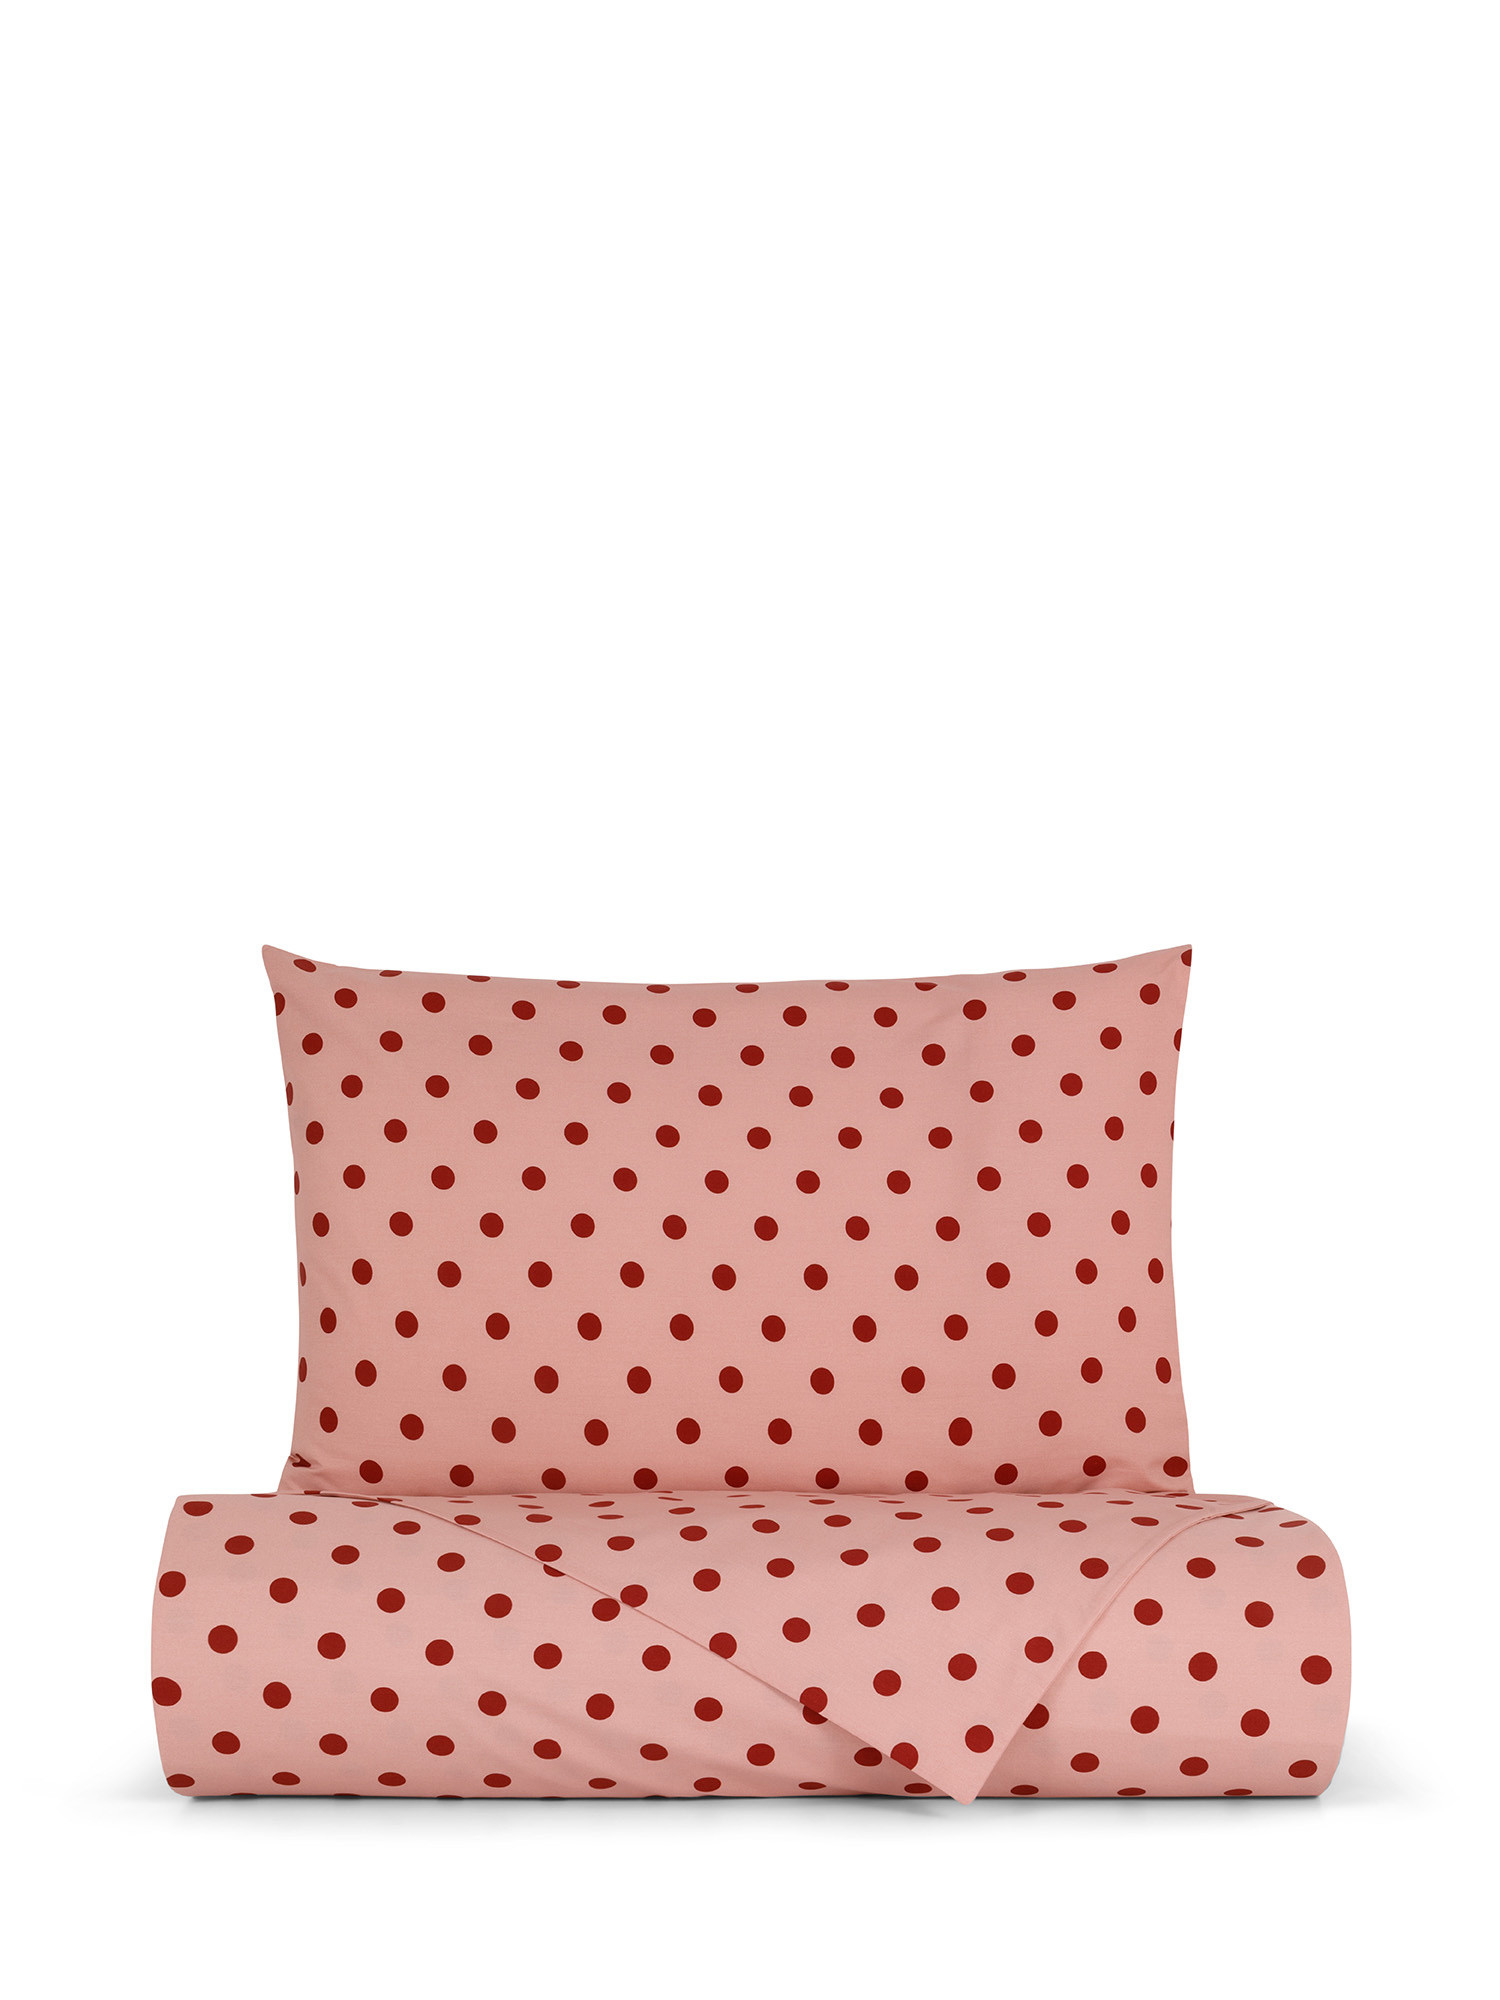 Polka dot print percale cotton pillowcase, Multicolor, large image number 1